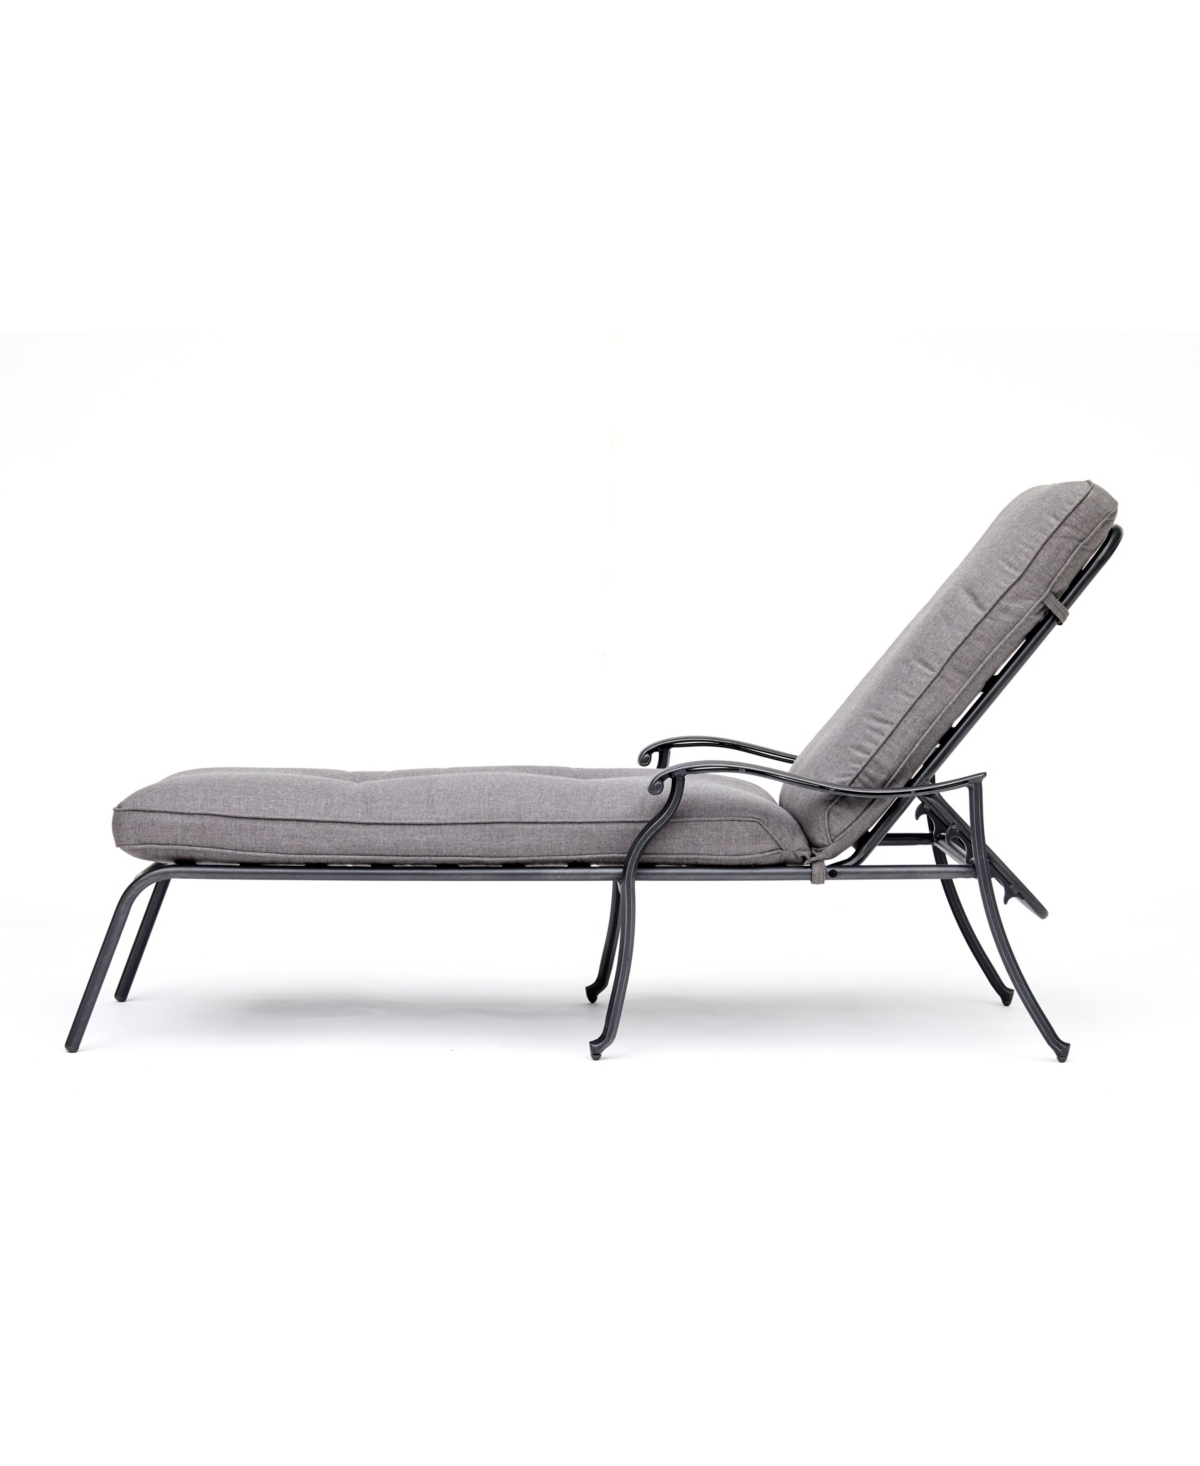 Vintage Ii Outdoor Chaise Lounge with Outdura Cushions, Created for Macys